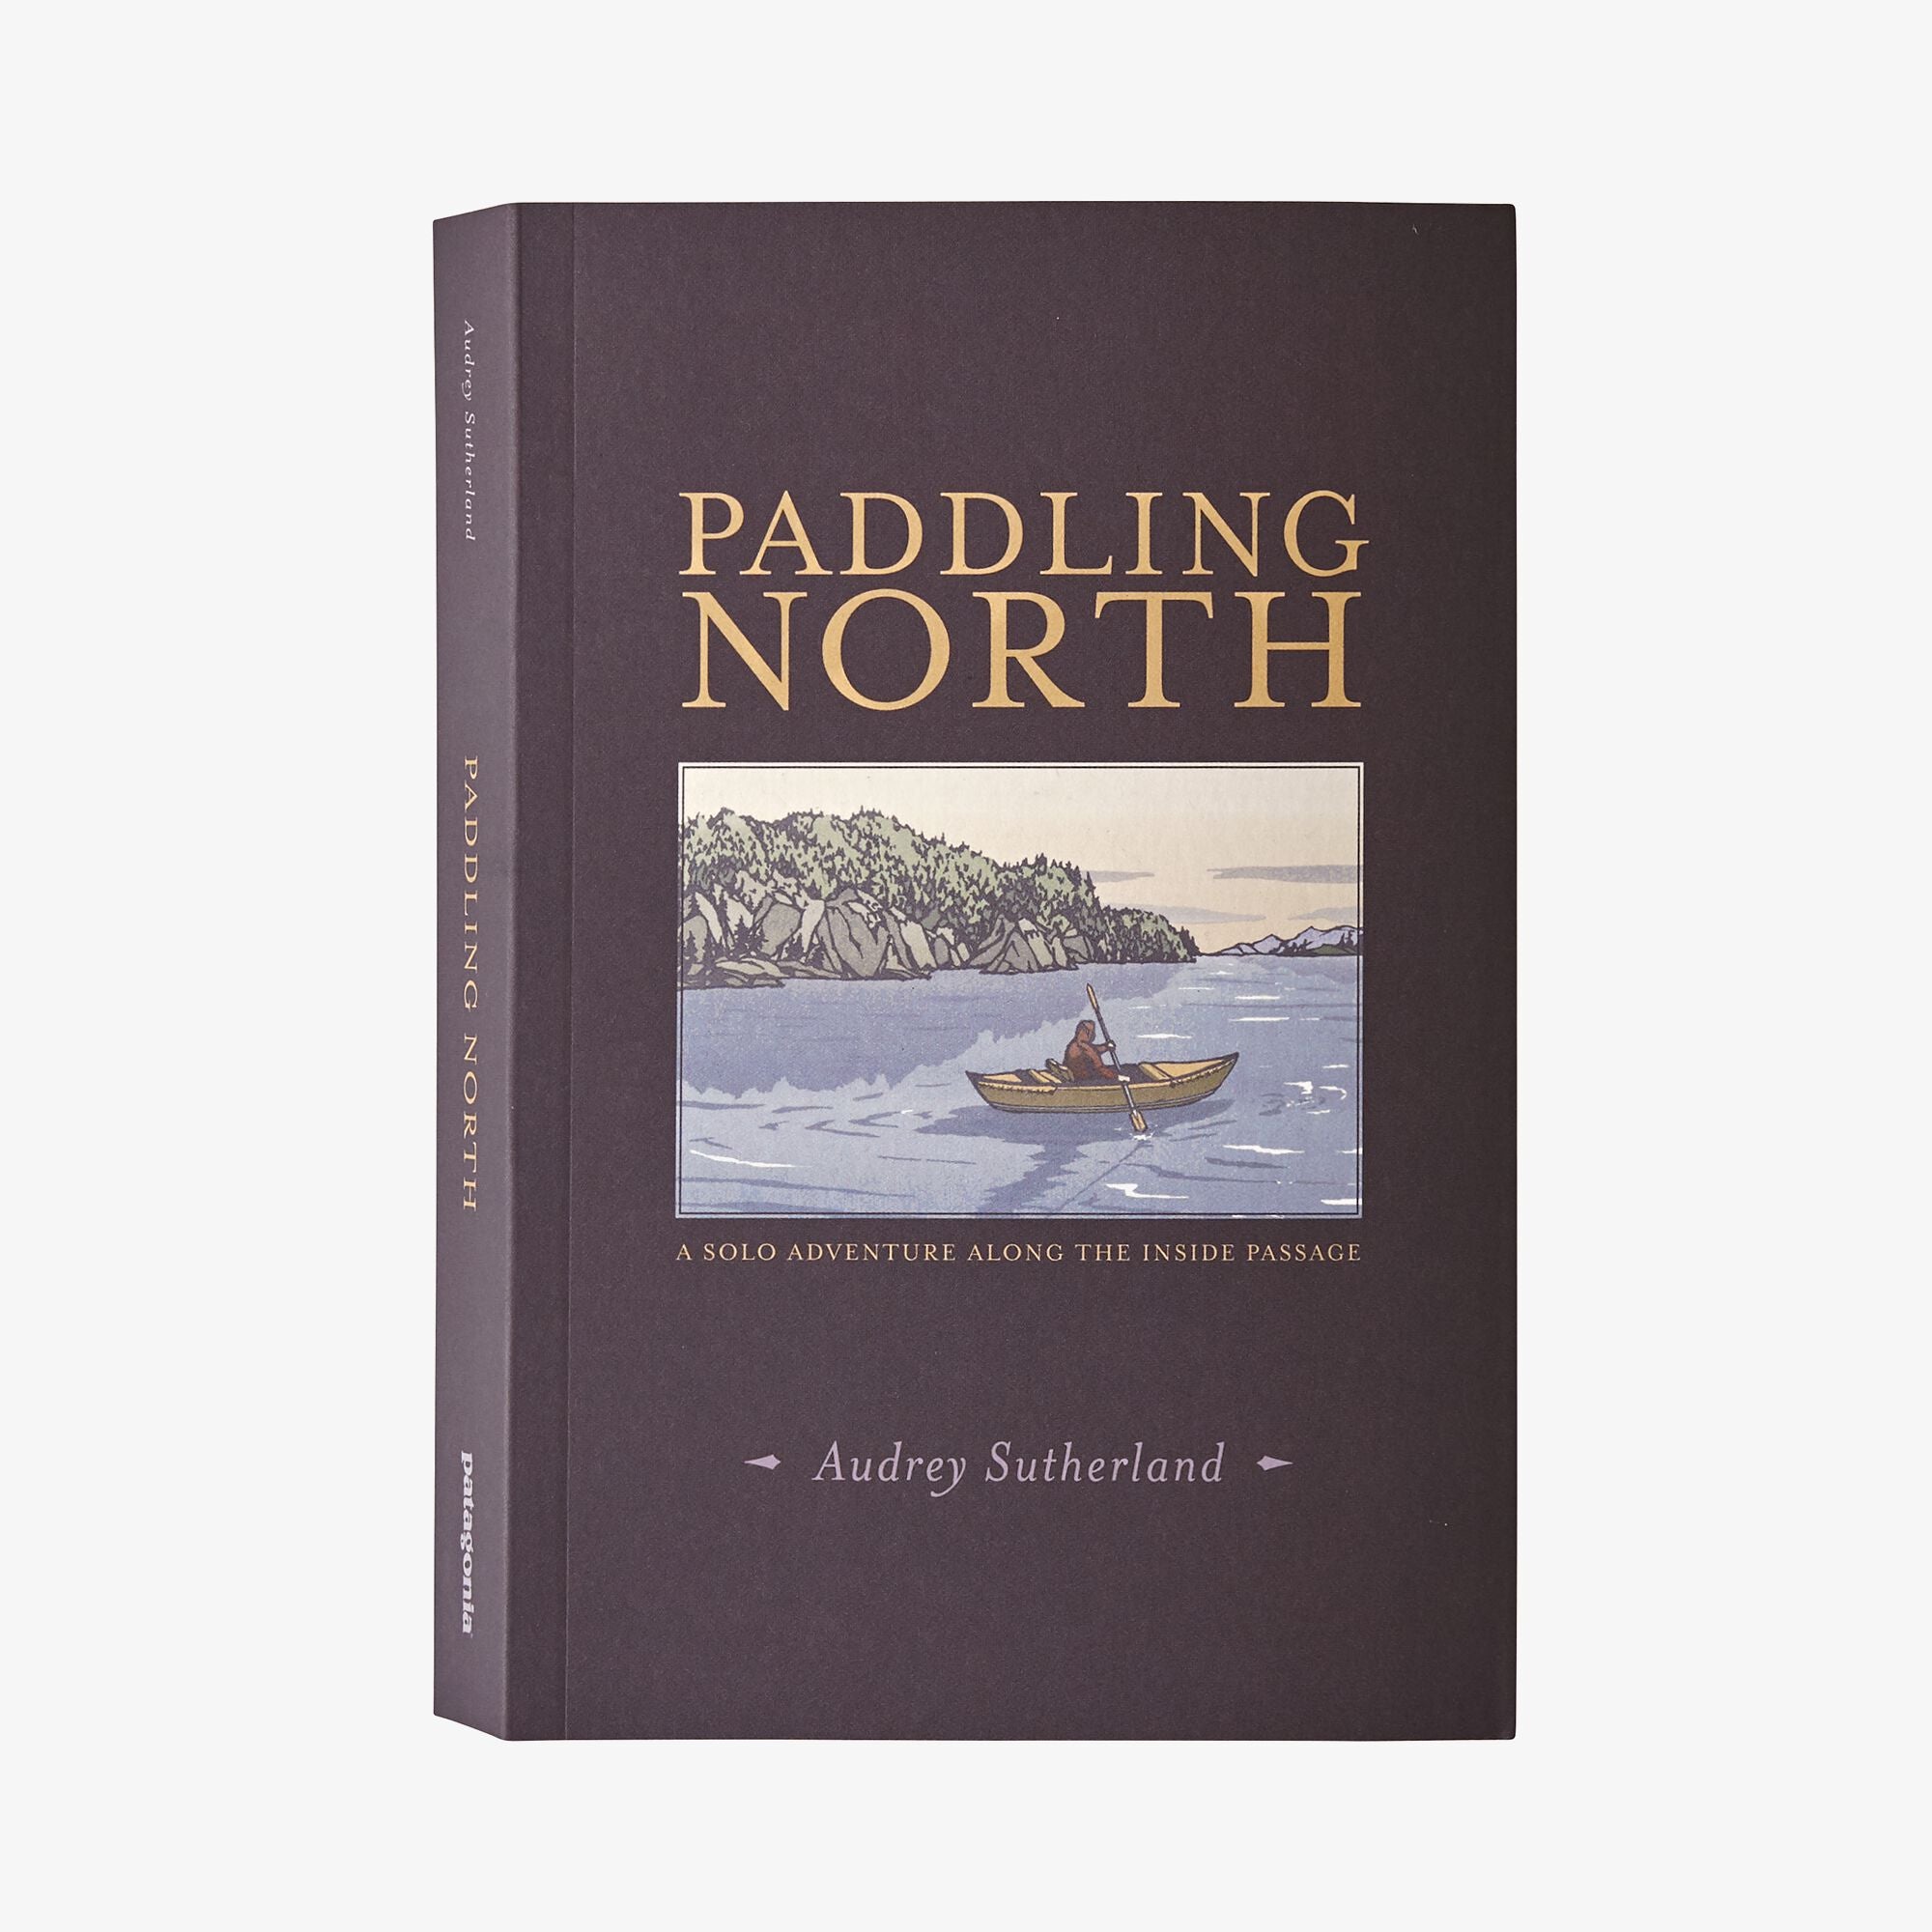 Paddling North: A Solo Adventure along the Inside Passage